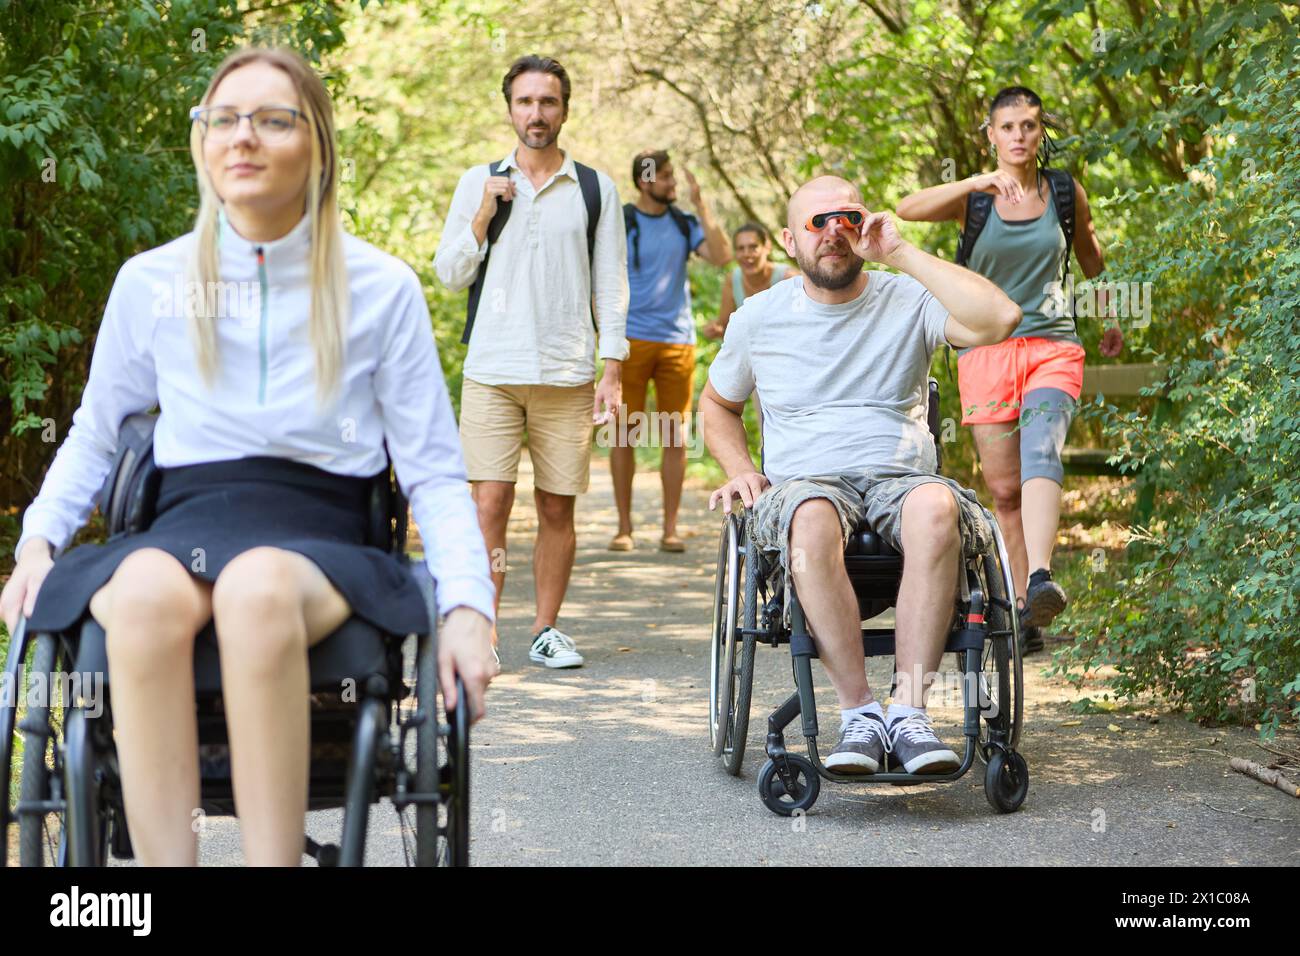 A group of friends, including individuals using wheelchairs, share a leisurely day outdoors, highlighting inclusion and accessibility. Stock Photo